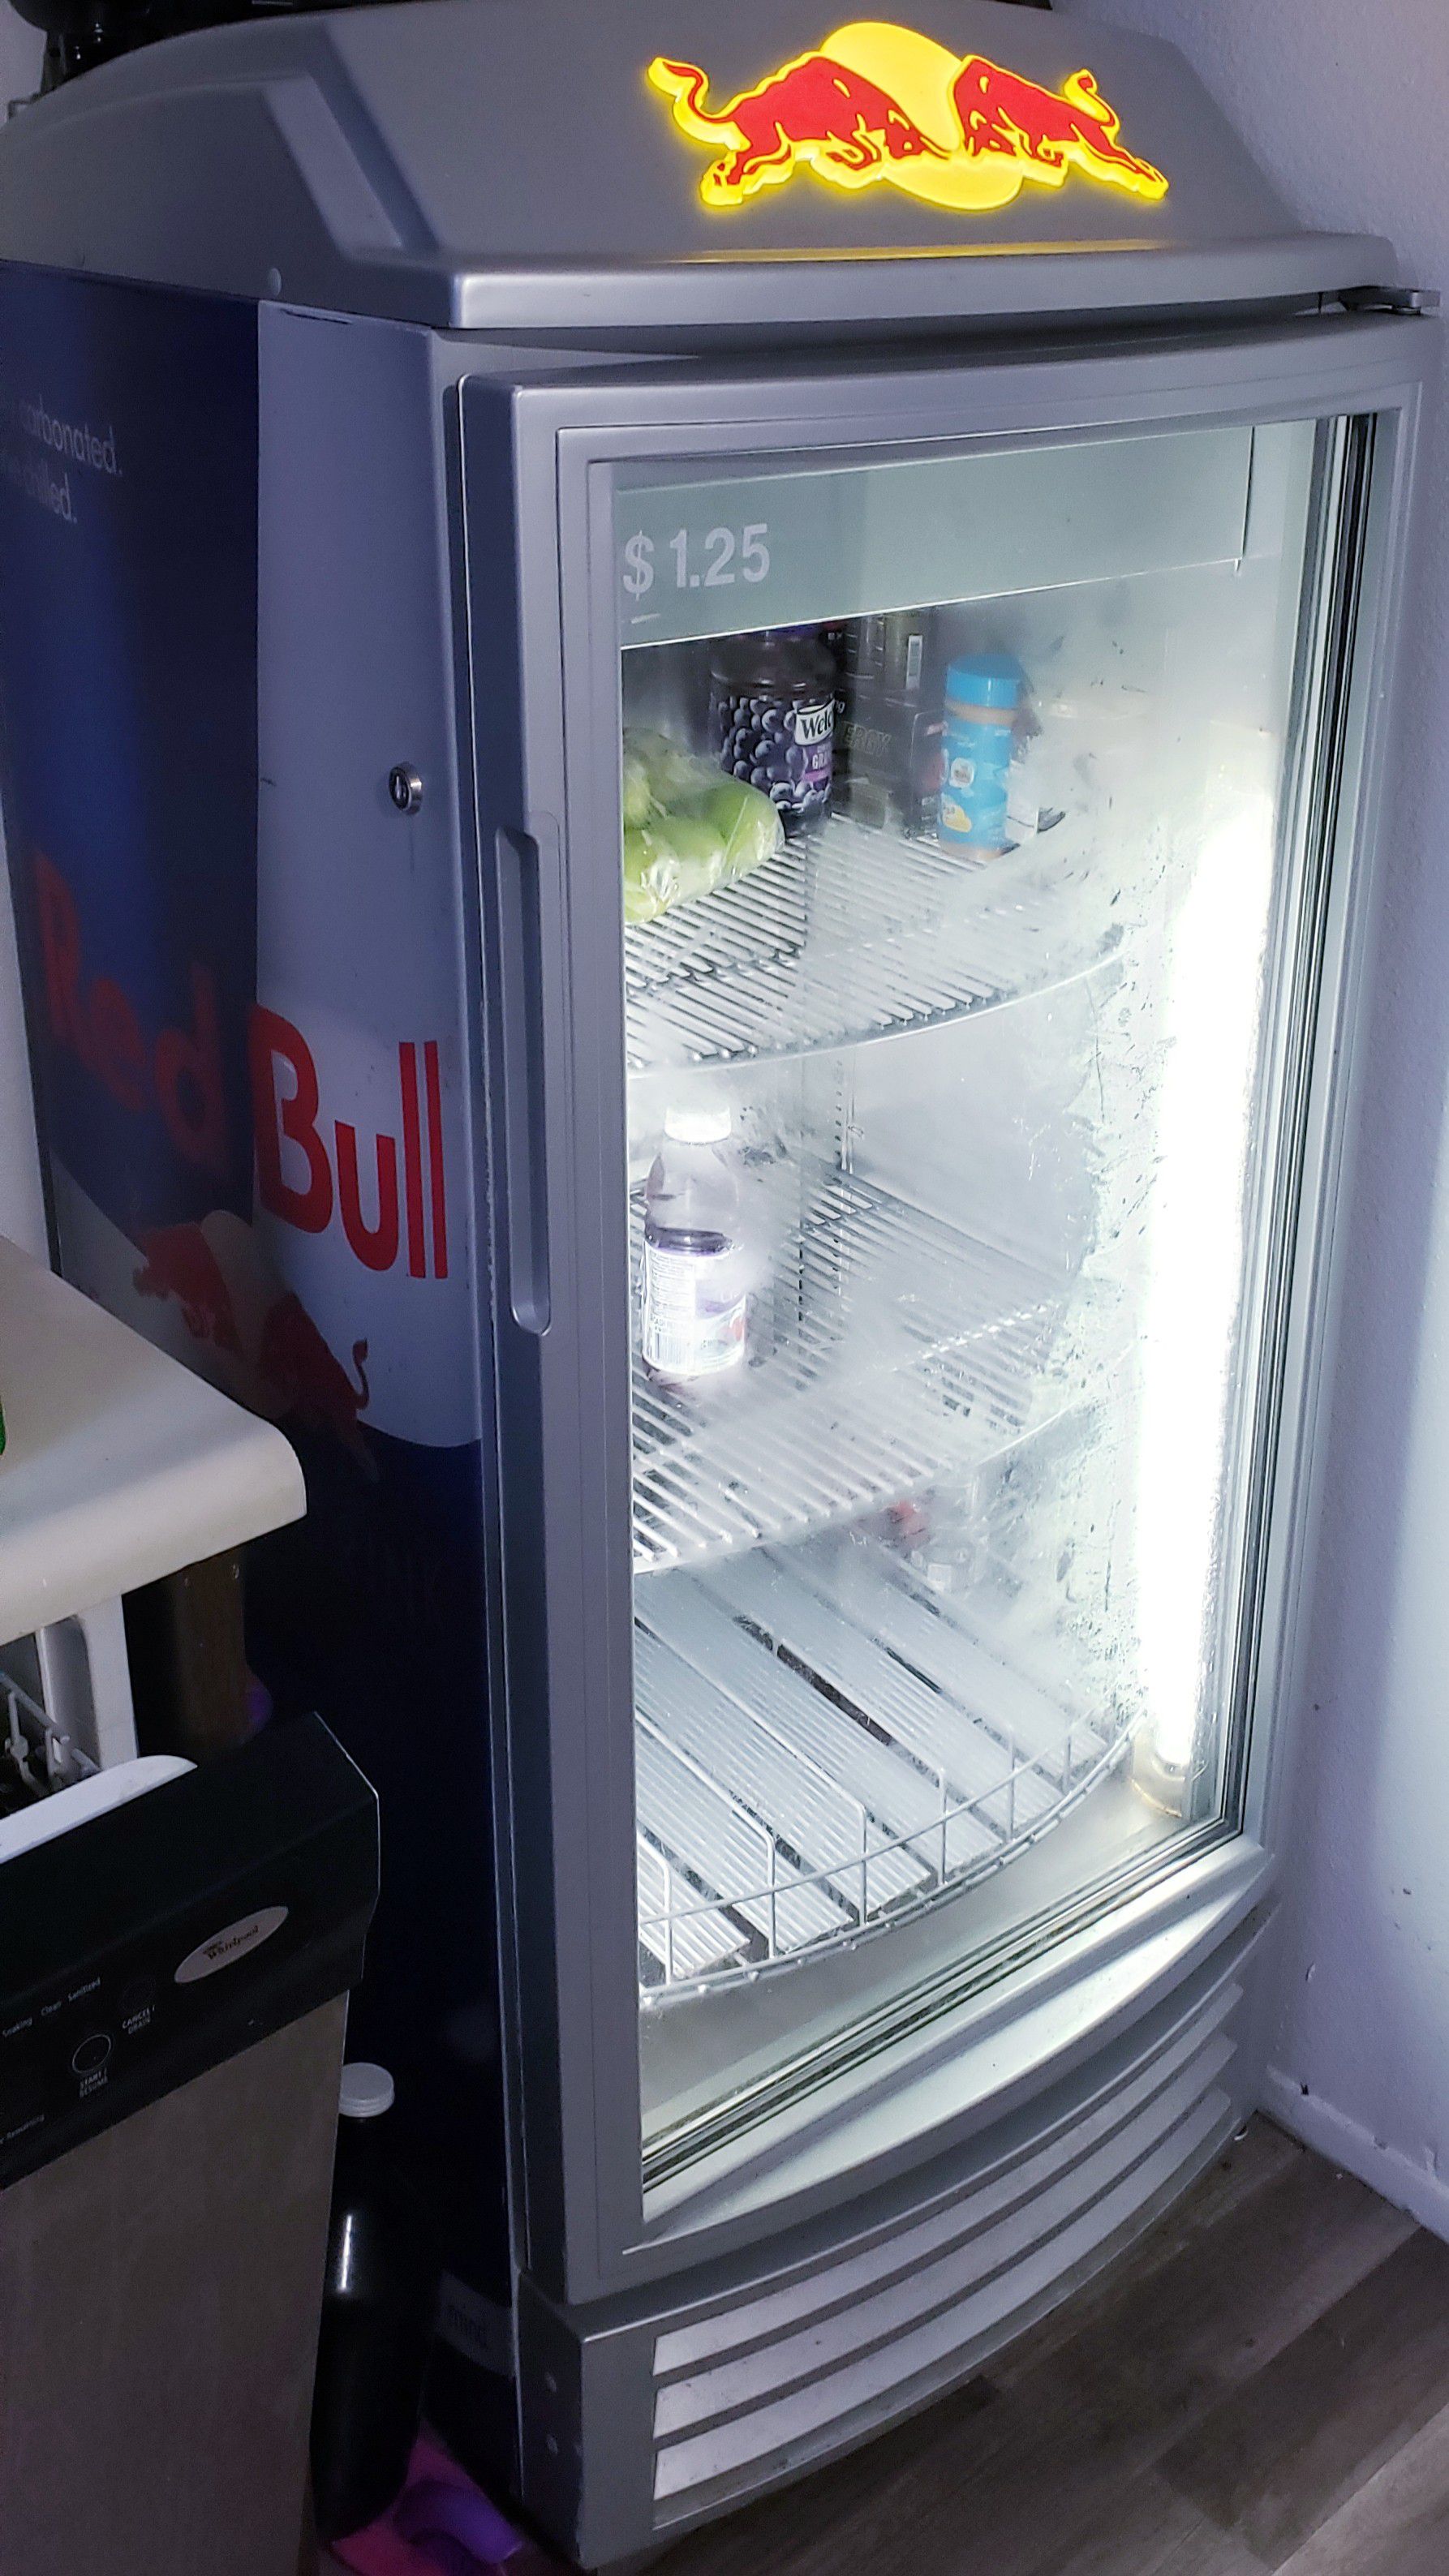 Redbull / Red Bull Commercial Beverage Cooler Fridge / Refrigerator w/ Hard to Find Full Lit Top Signage! Cools to the Chill! Works Great!